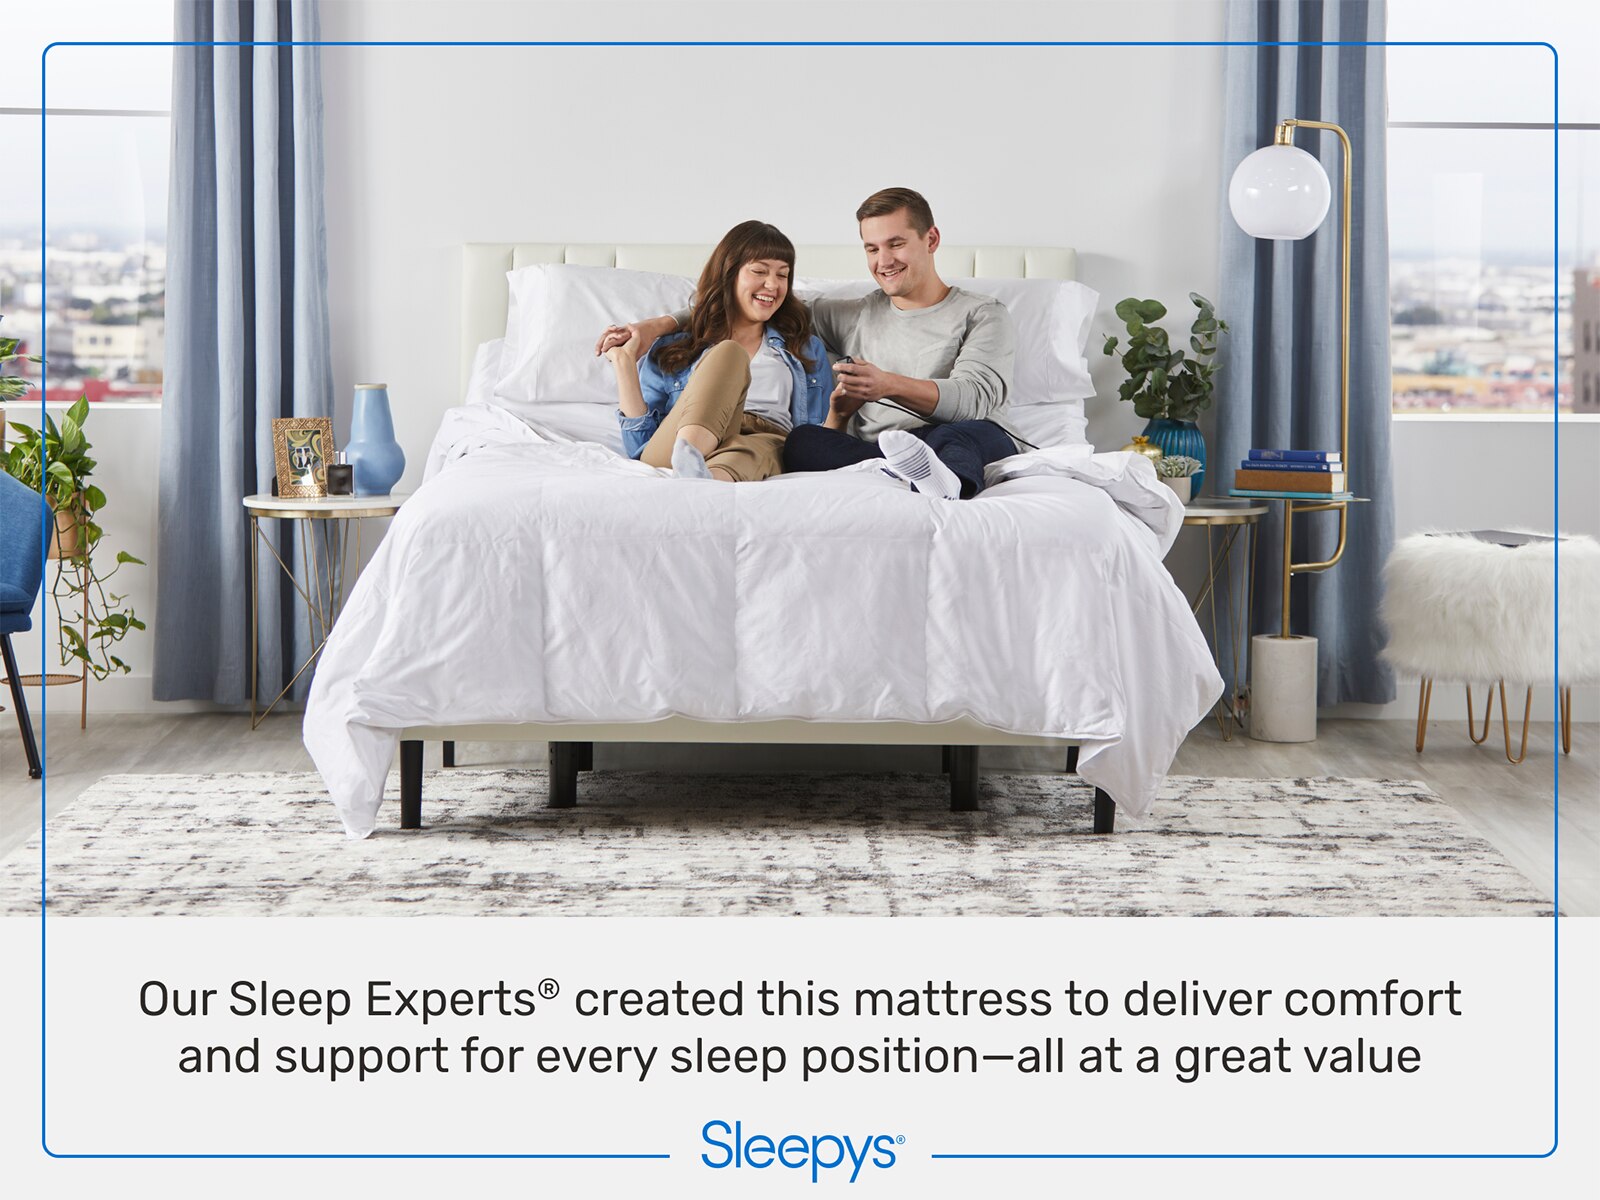 By Sealy® 12” Firm Mattress